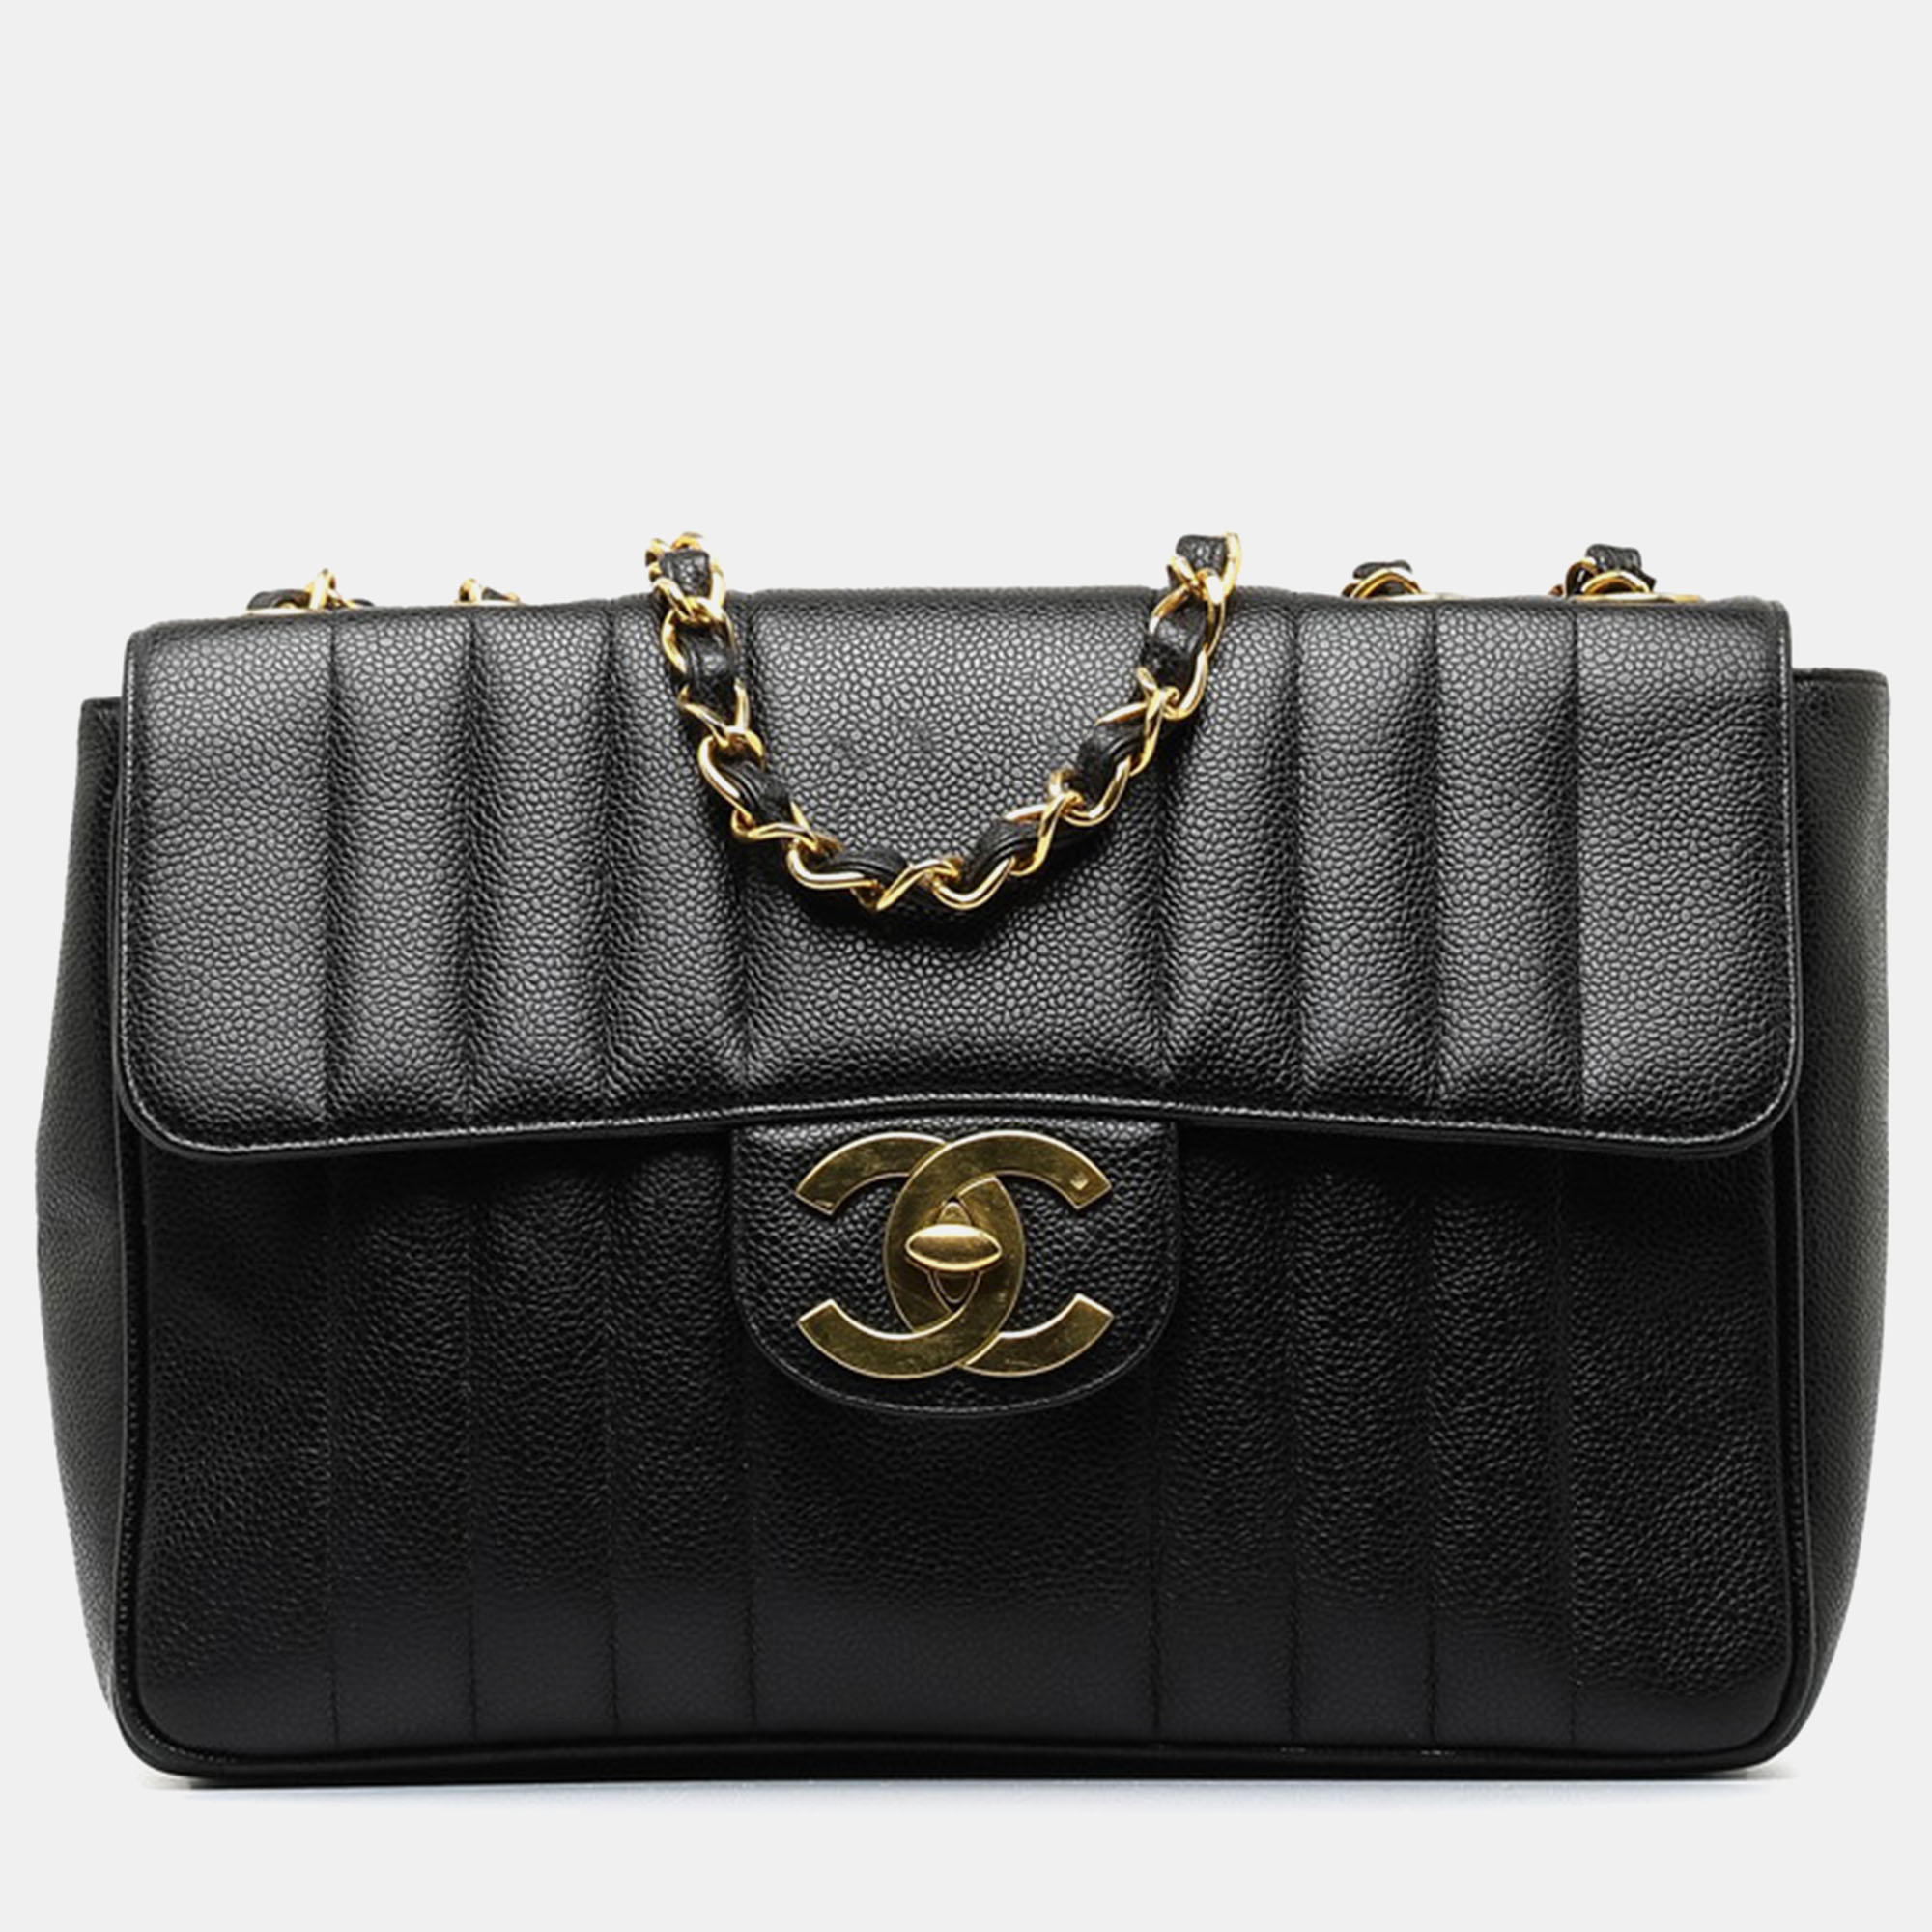 Pre-owned Chanel Black Caviar Leather Classic Single Flap Shoulder Bags